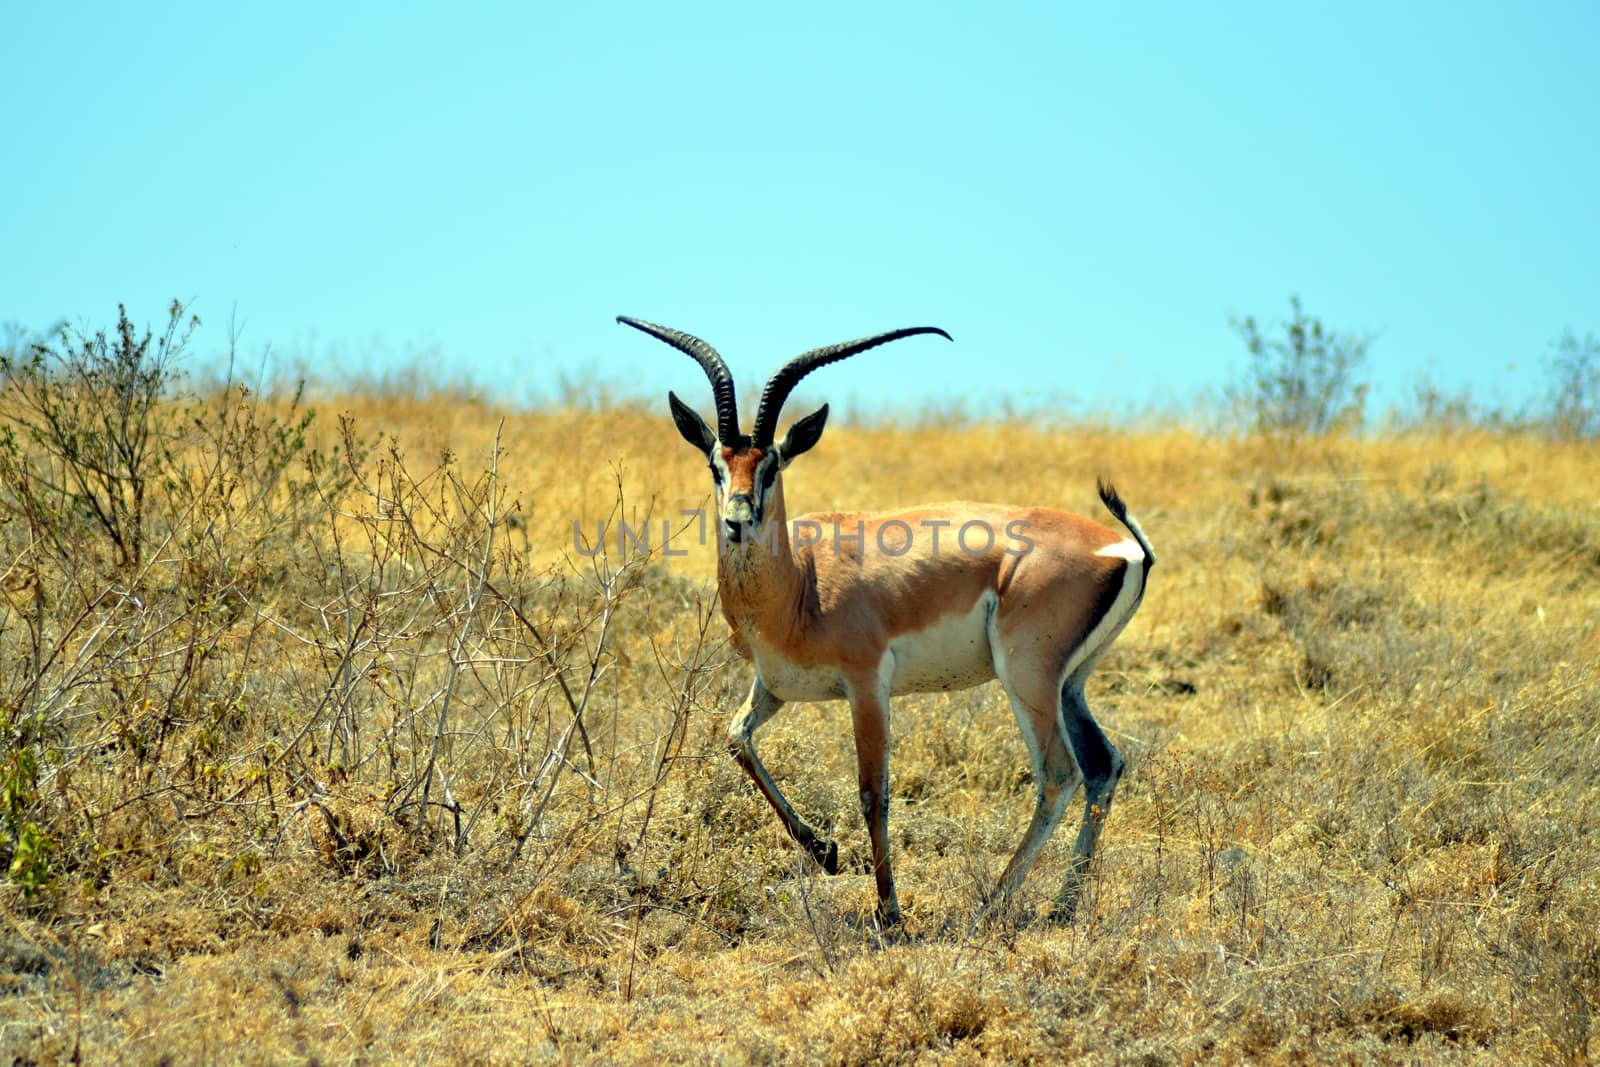 Gazelle the curious look by Philou1000